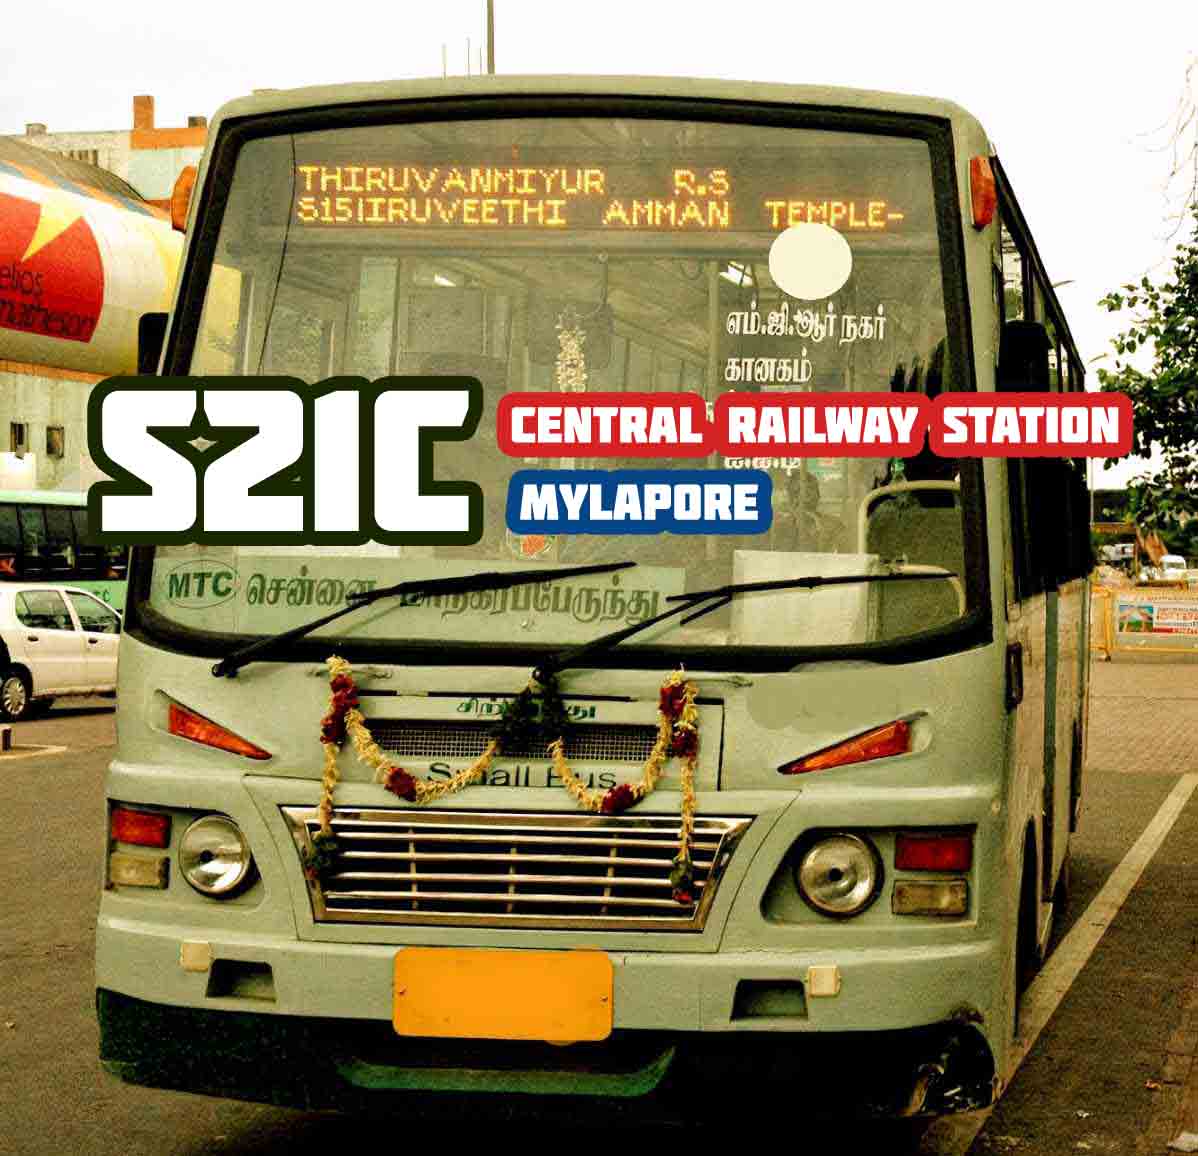 Central Railway Station to Mylapore MTC Bus Route S21C